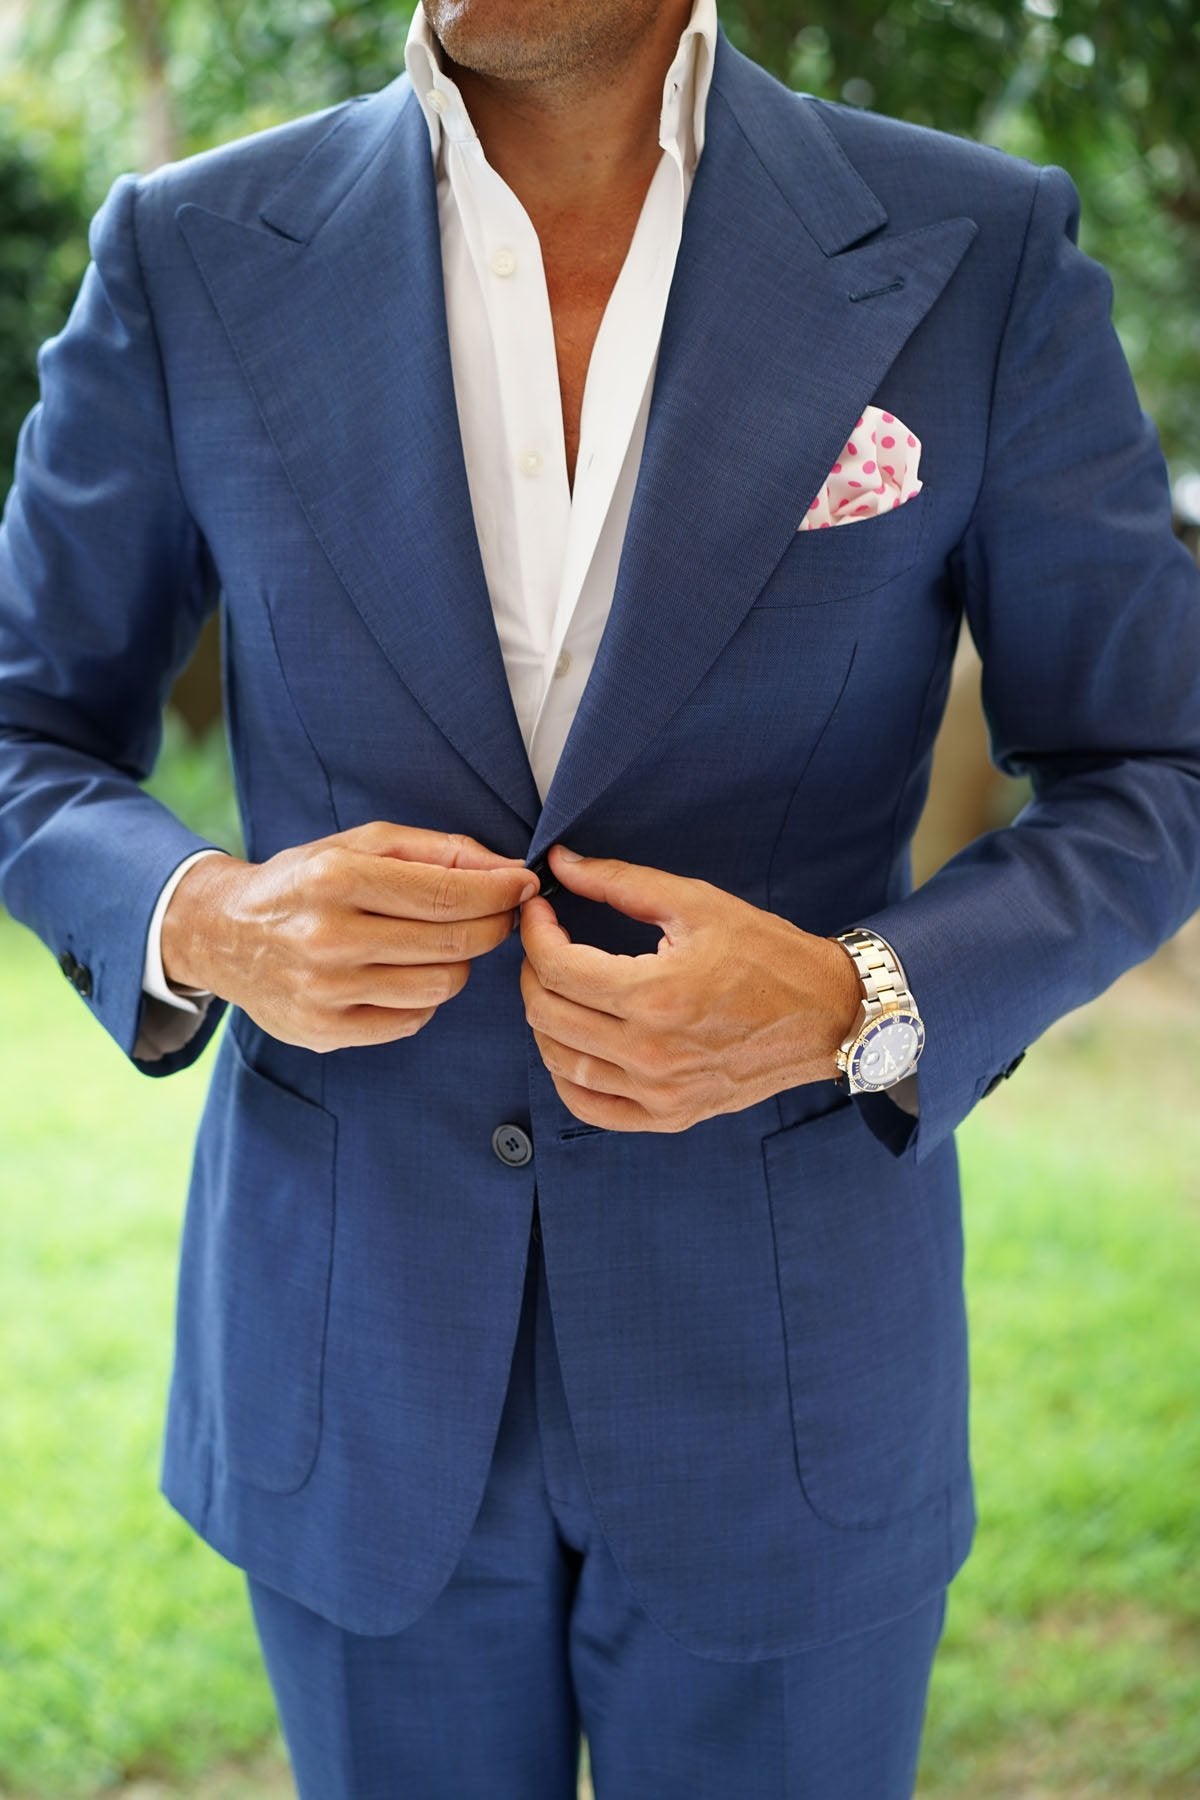 White Cotton with Large Hot Pink Polka Dots Pocket Square | Men's ...